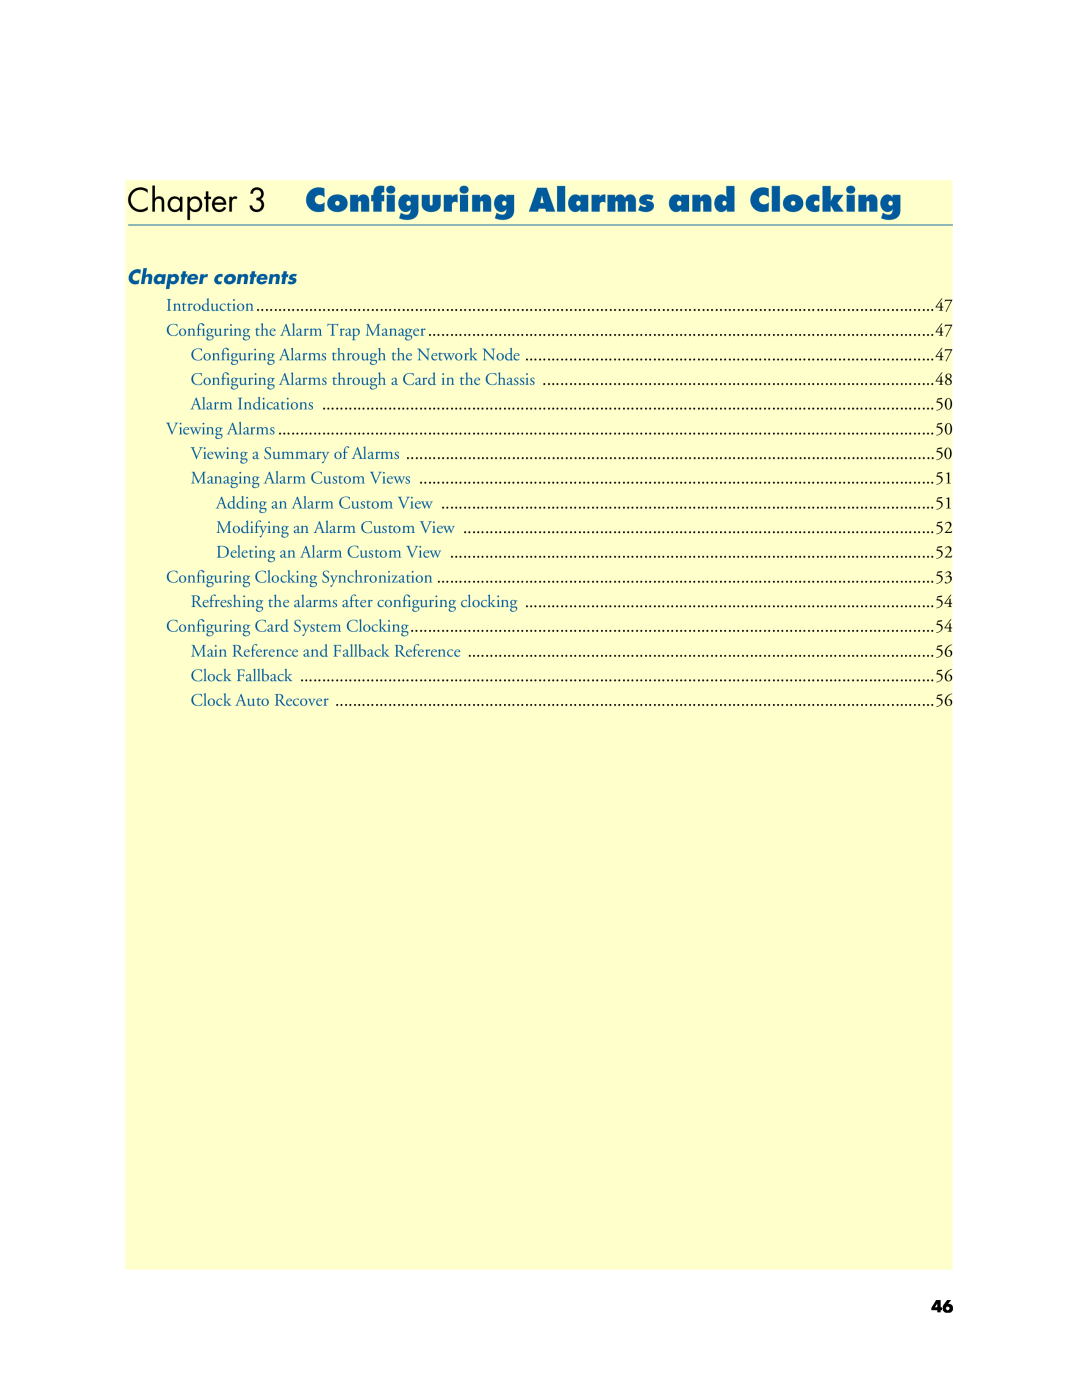 Patton electronic 6300 user manual Configuring Alarms and Clocking, Chapter contents 